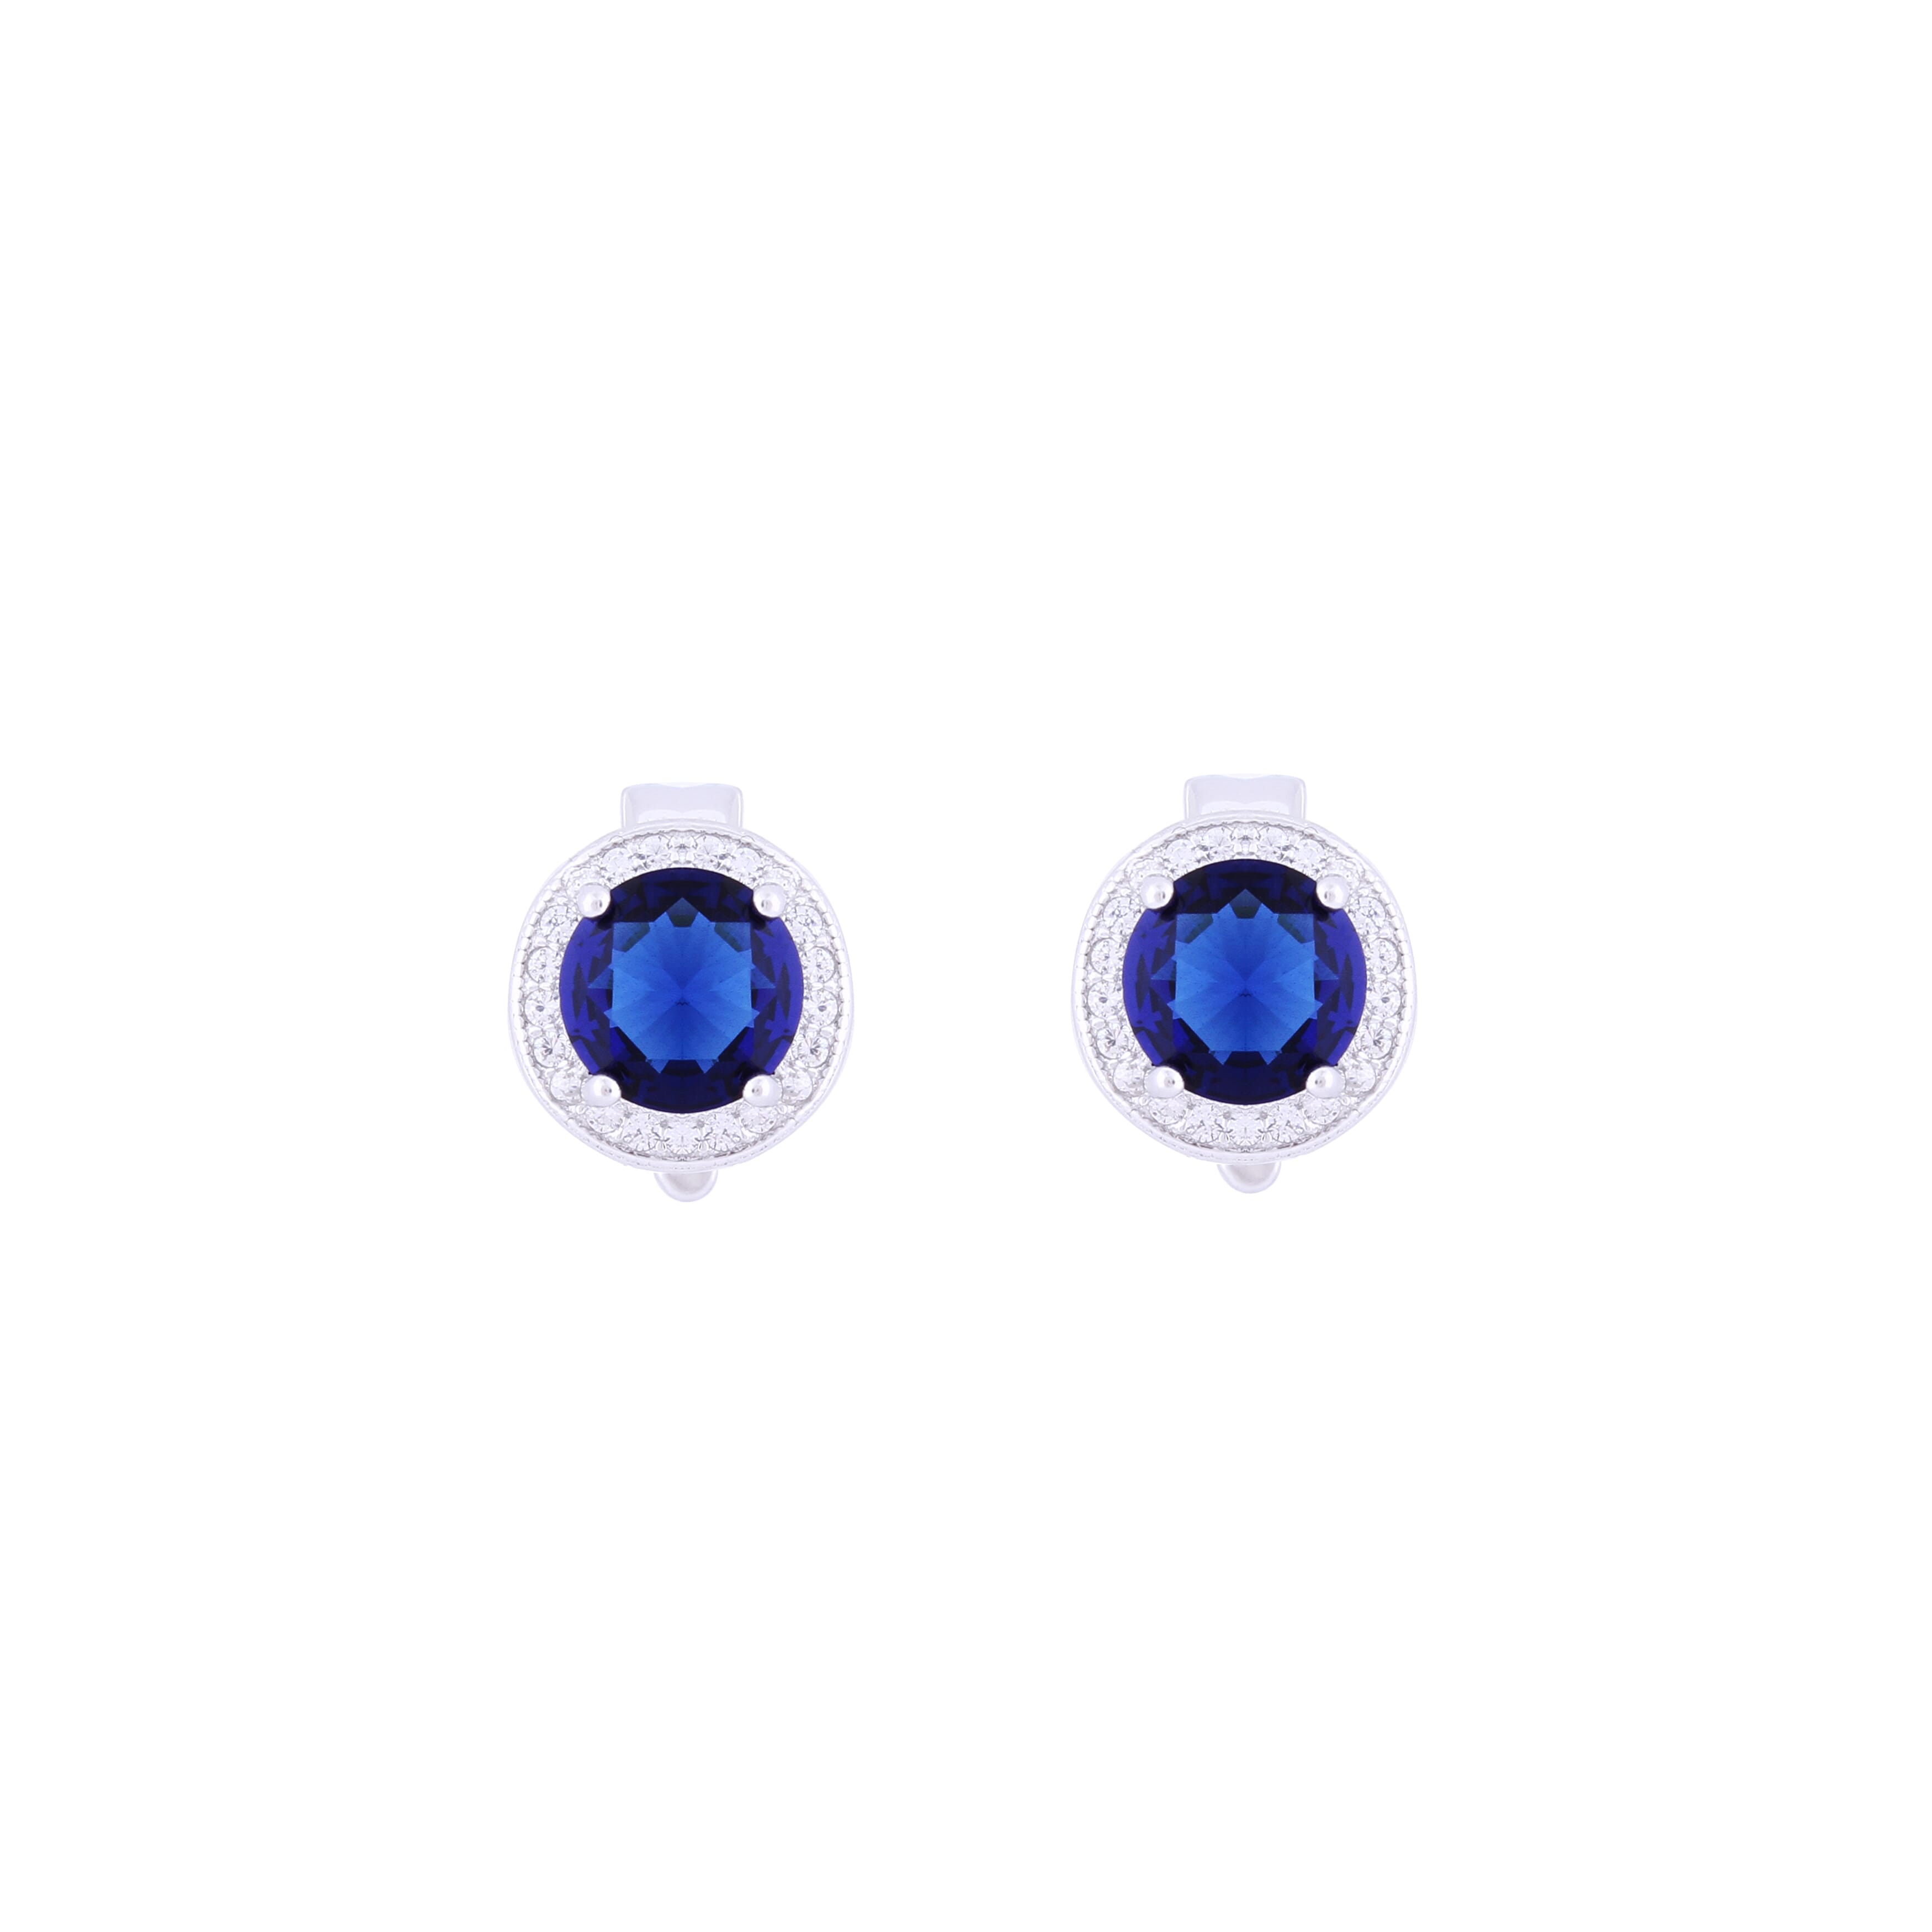 Asfour Crystal 925 Sterling Silver Clips Earrings with Blue Round Stones